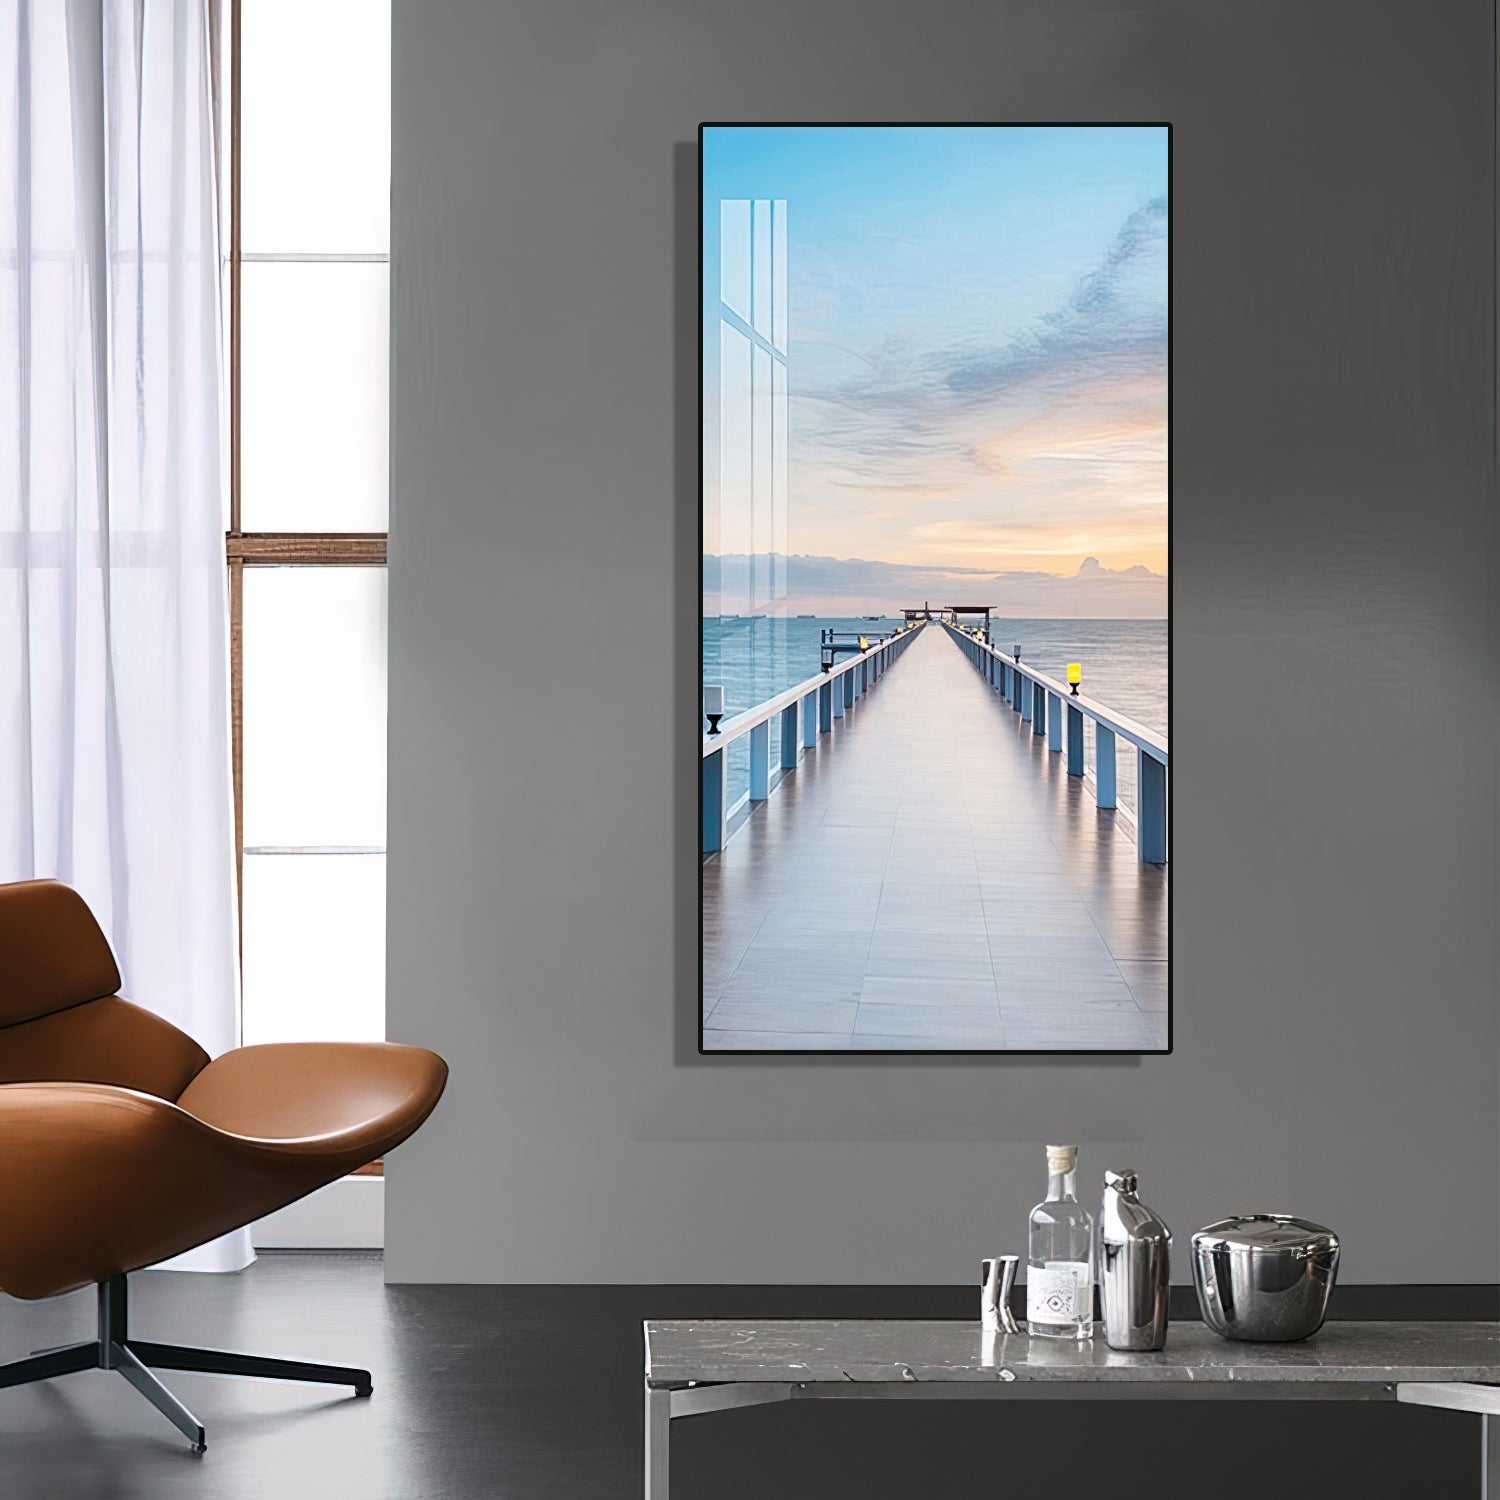 Captivating Sky Bridge Landscape Wall Painting - 60x120 cm Home Decor crystal porcelain Framed Large wall wall art wall accents landscape Nature-inspired